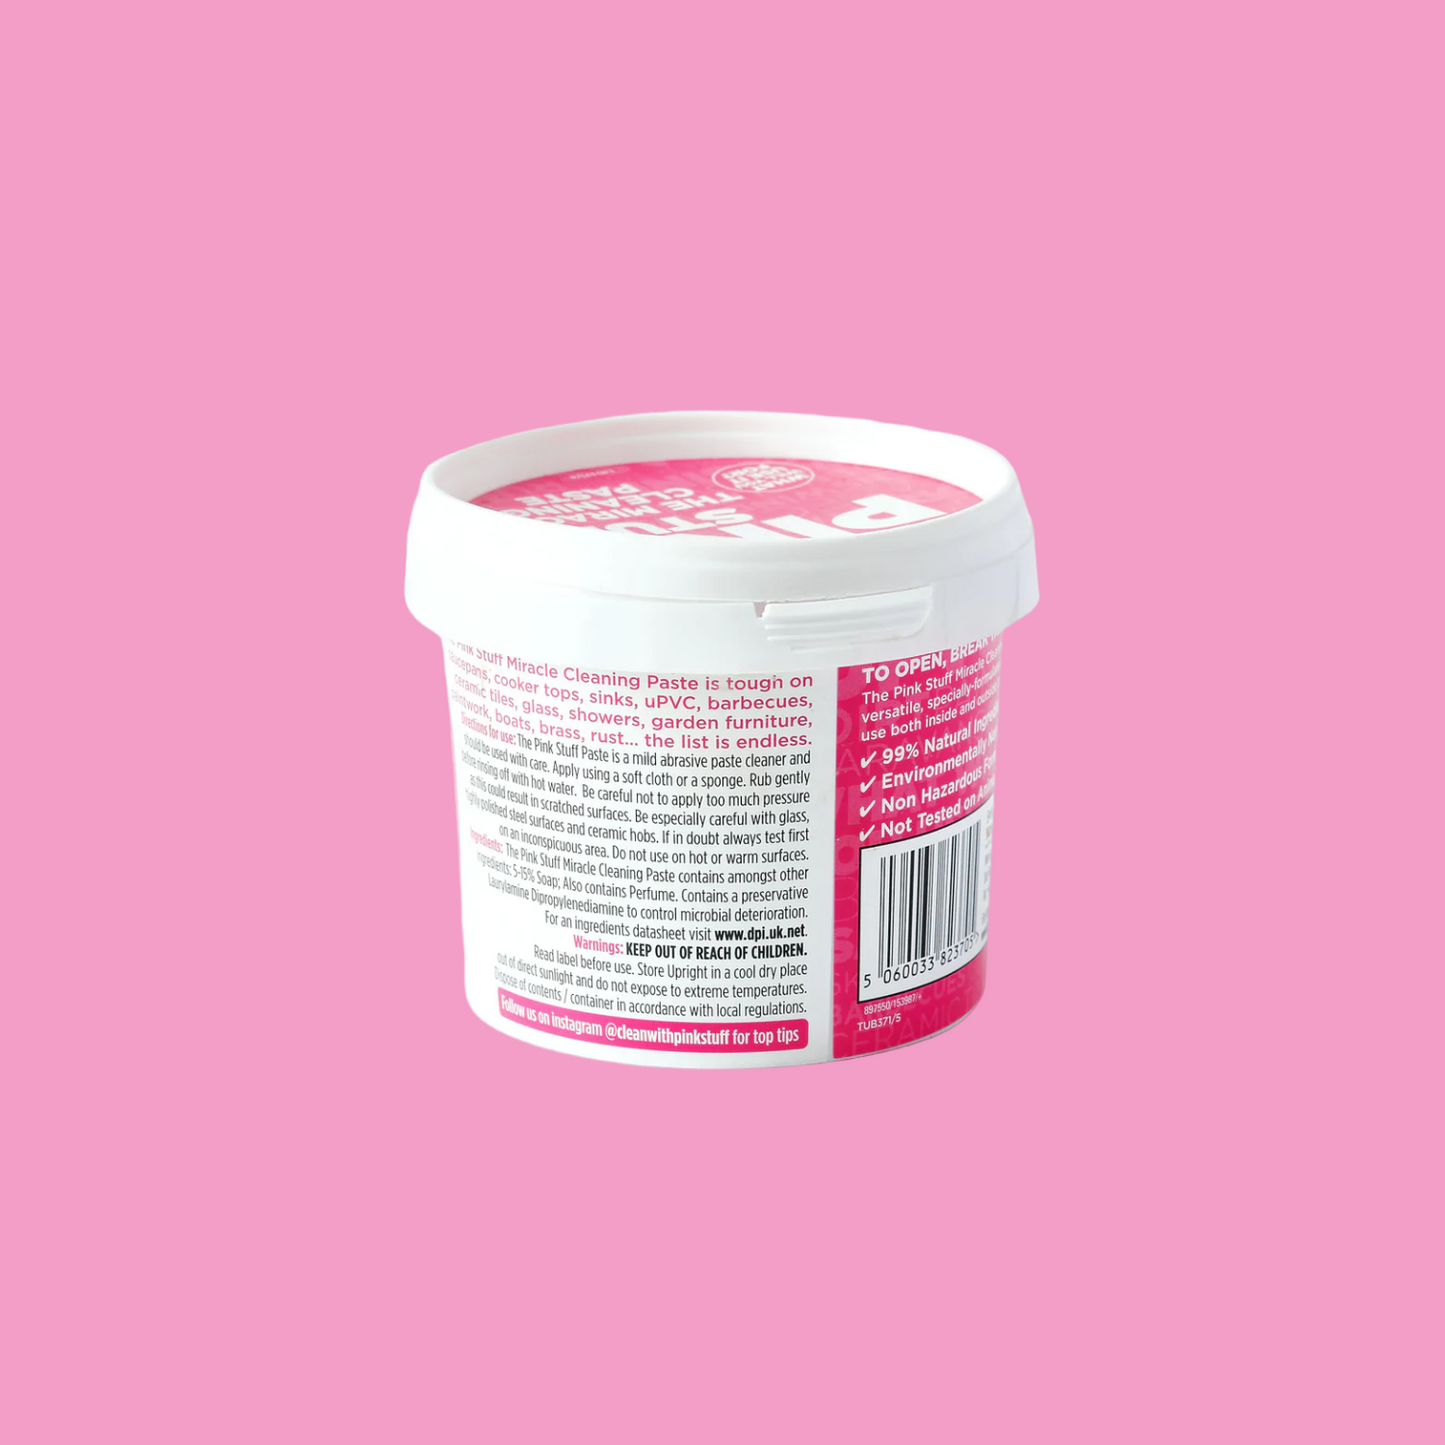 The Pink Stuff Miracle Cleaning Paste 850g Dented